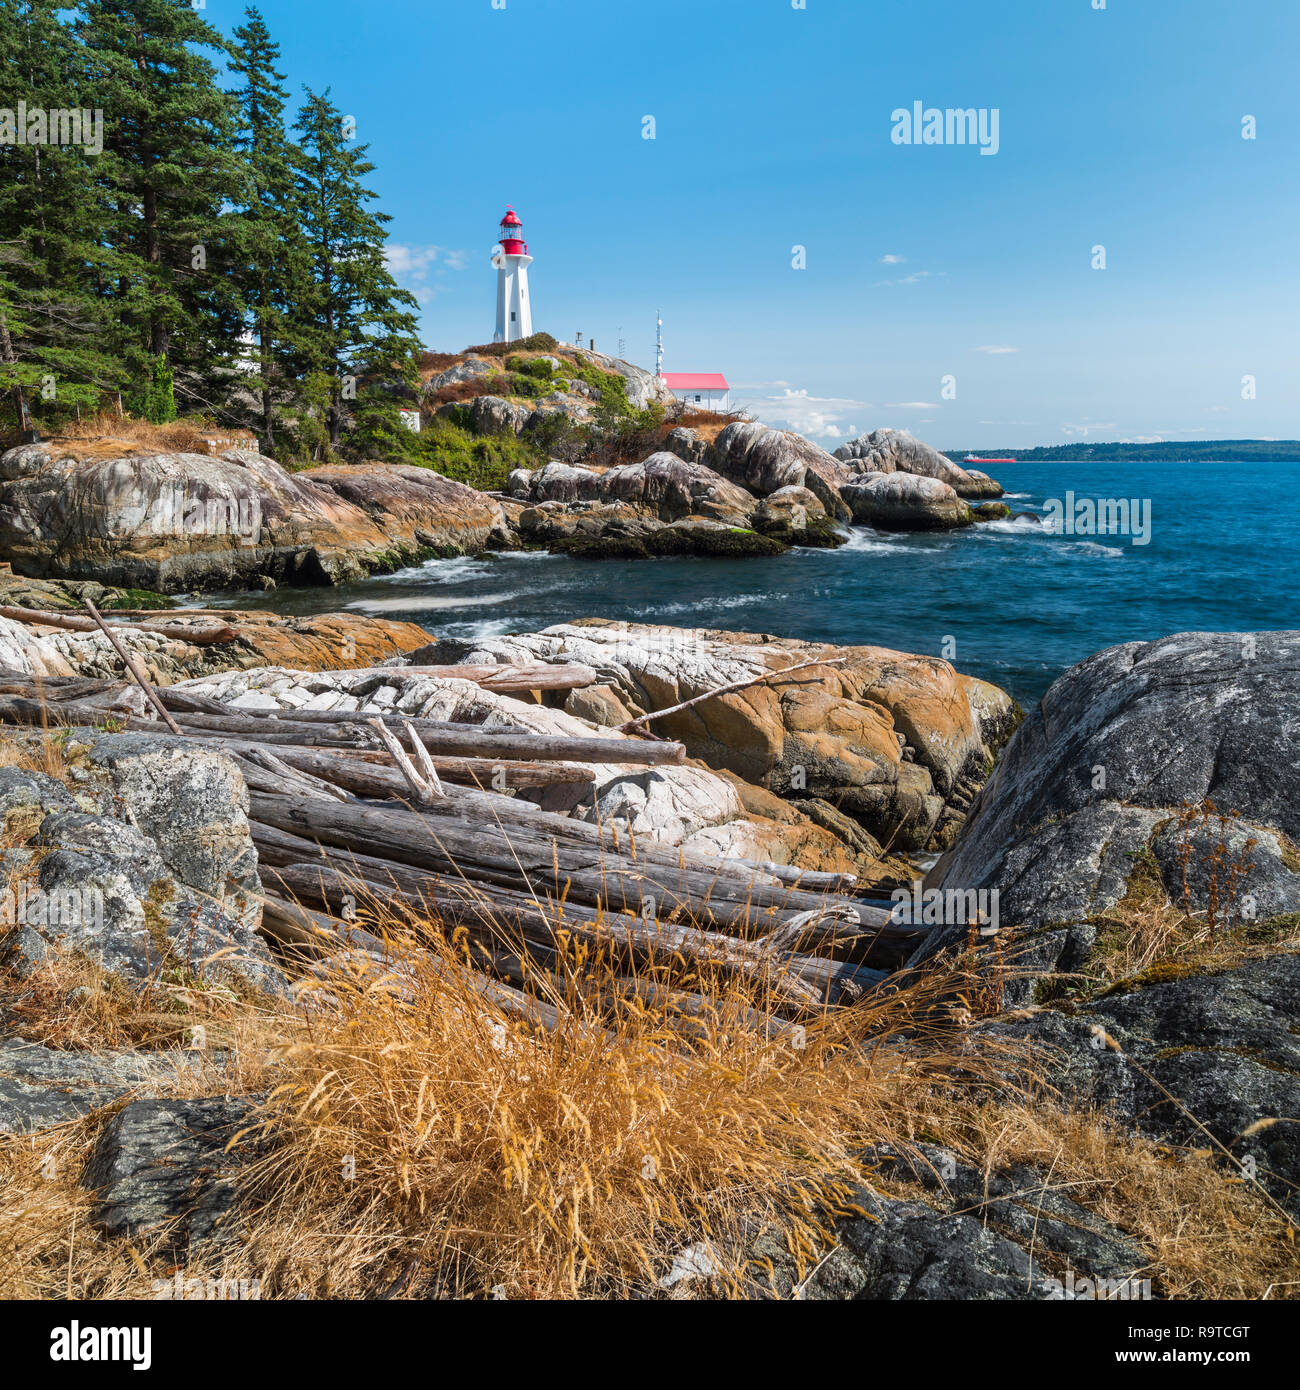 Standing at Shore Pine Point looking across the rocks & logs in the bay towards Point Atkinson Lighthouse in West Vancouver Stock Photo